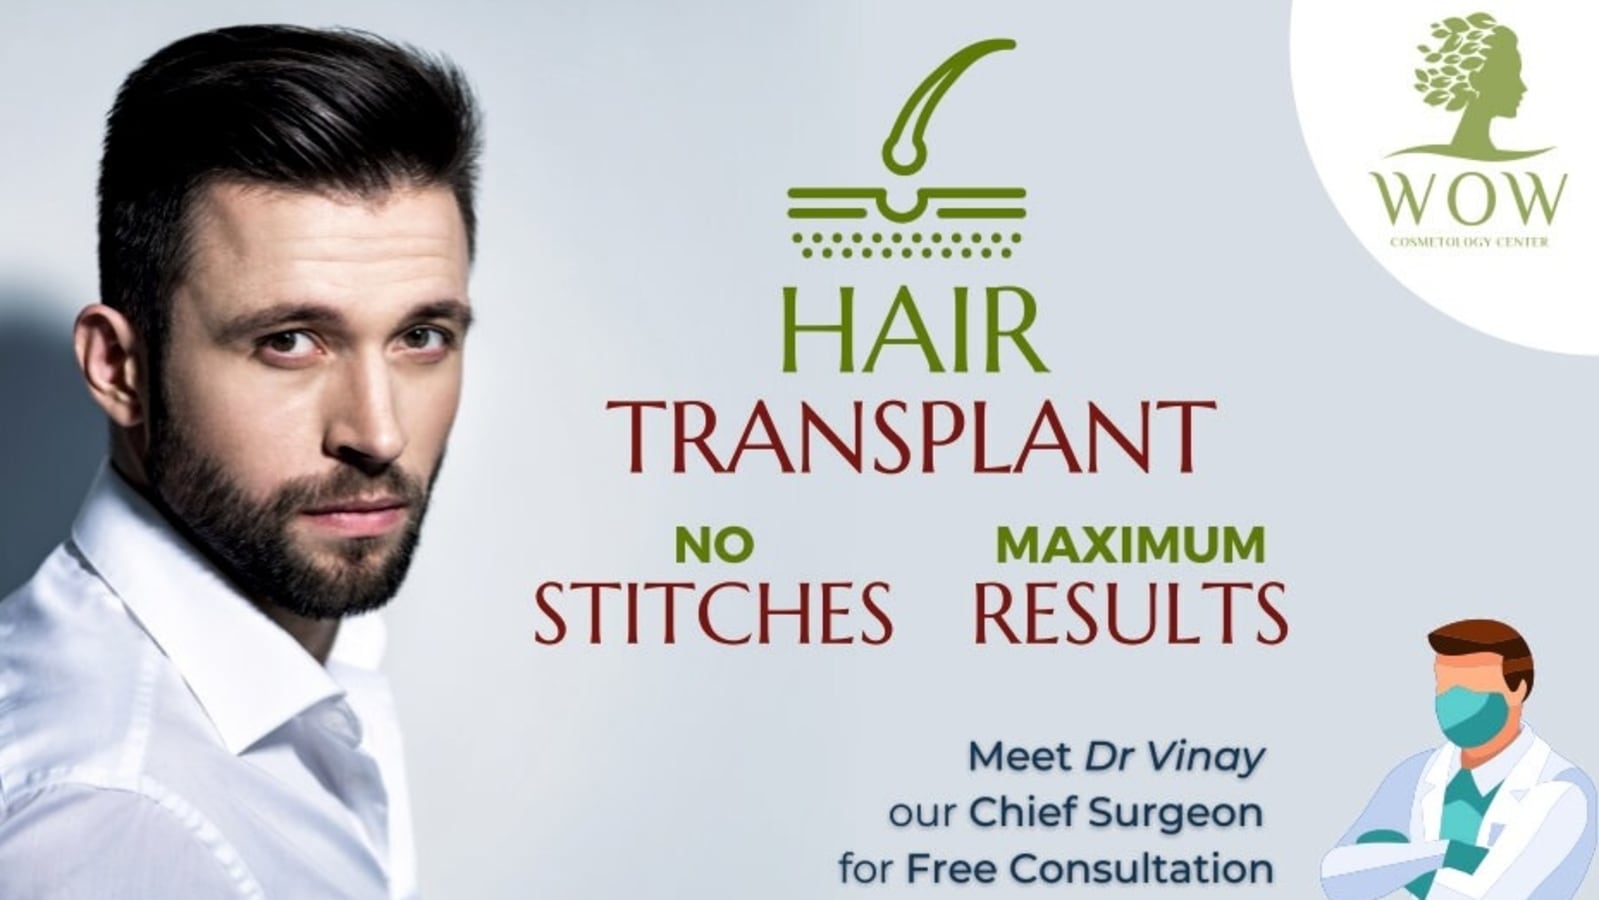 5 Best Hair Transplant Clinics in India